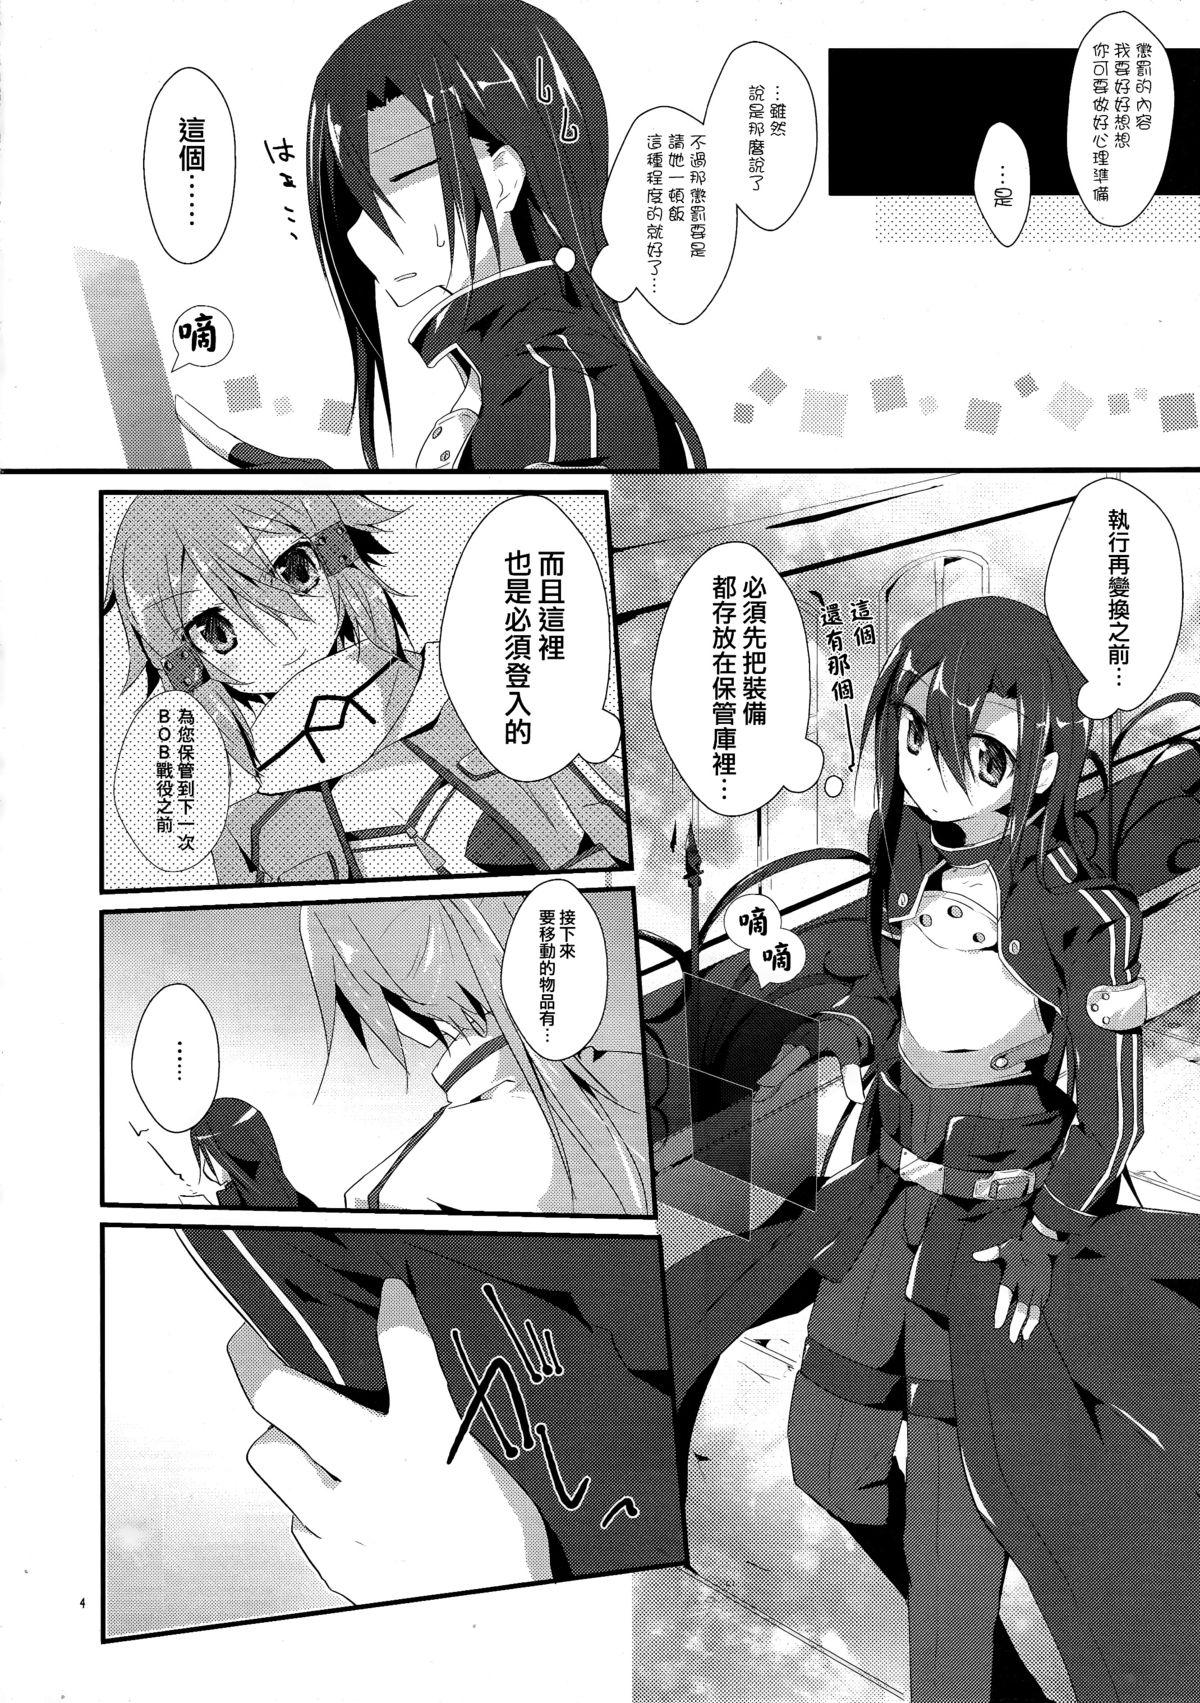 French Honey Punishment - Sword art online Ride - Page 6